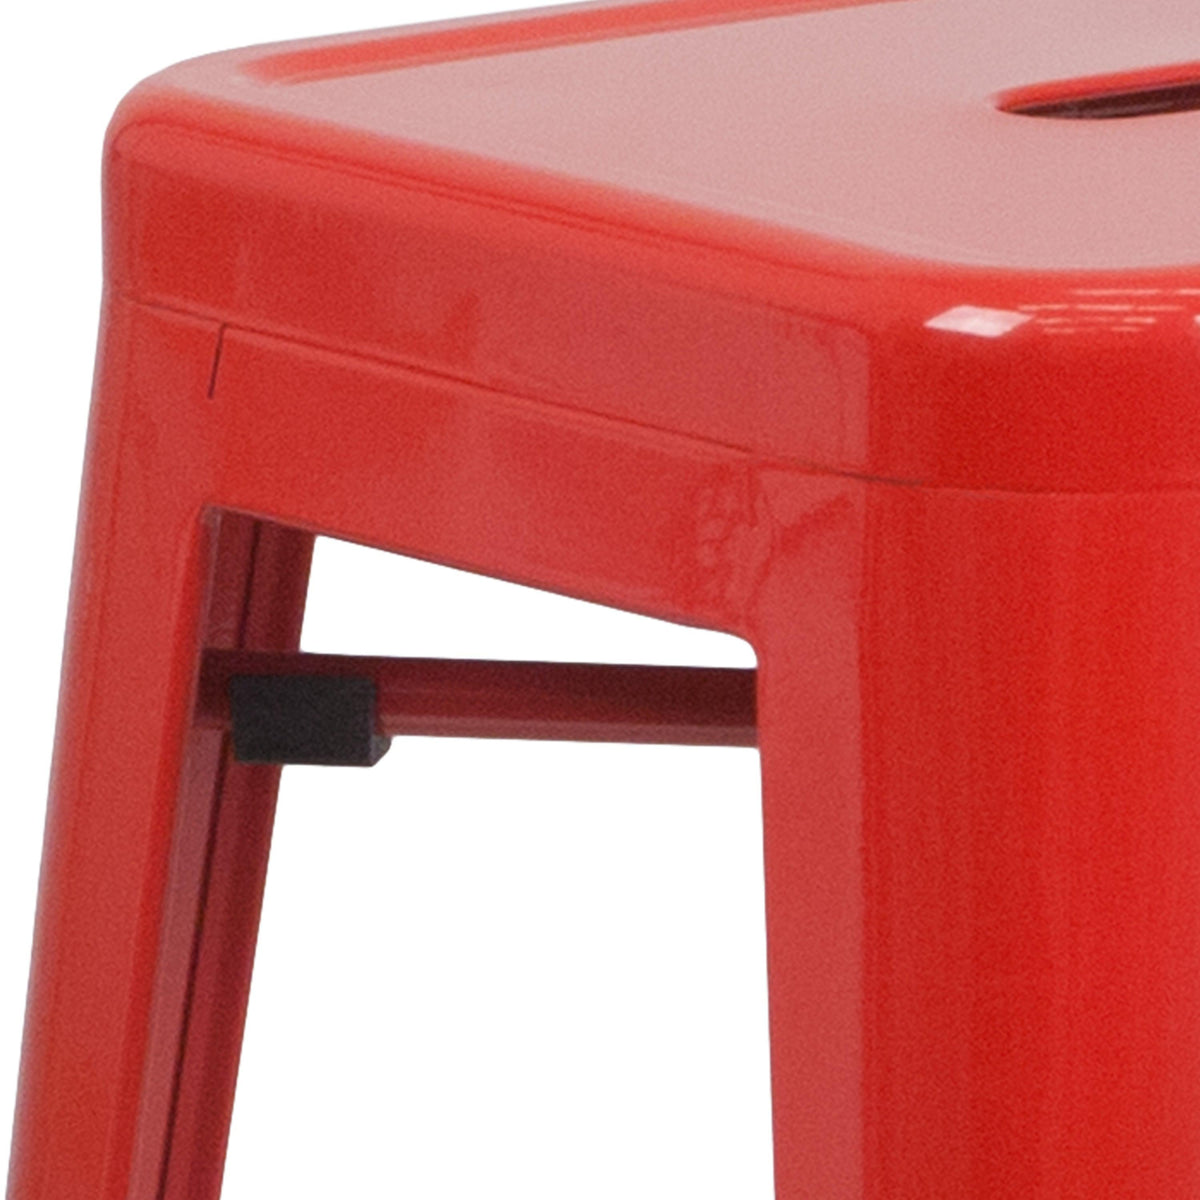 Red |#| Commercial Grade 30inchH Backless Red Metal Indoor-Outdoor Barstool, Square